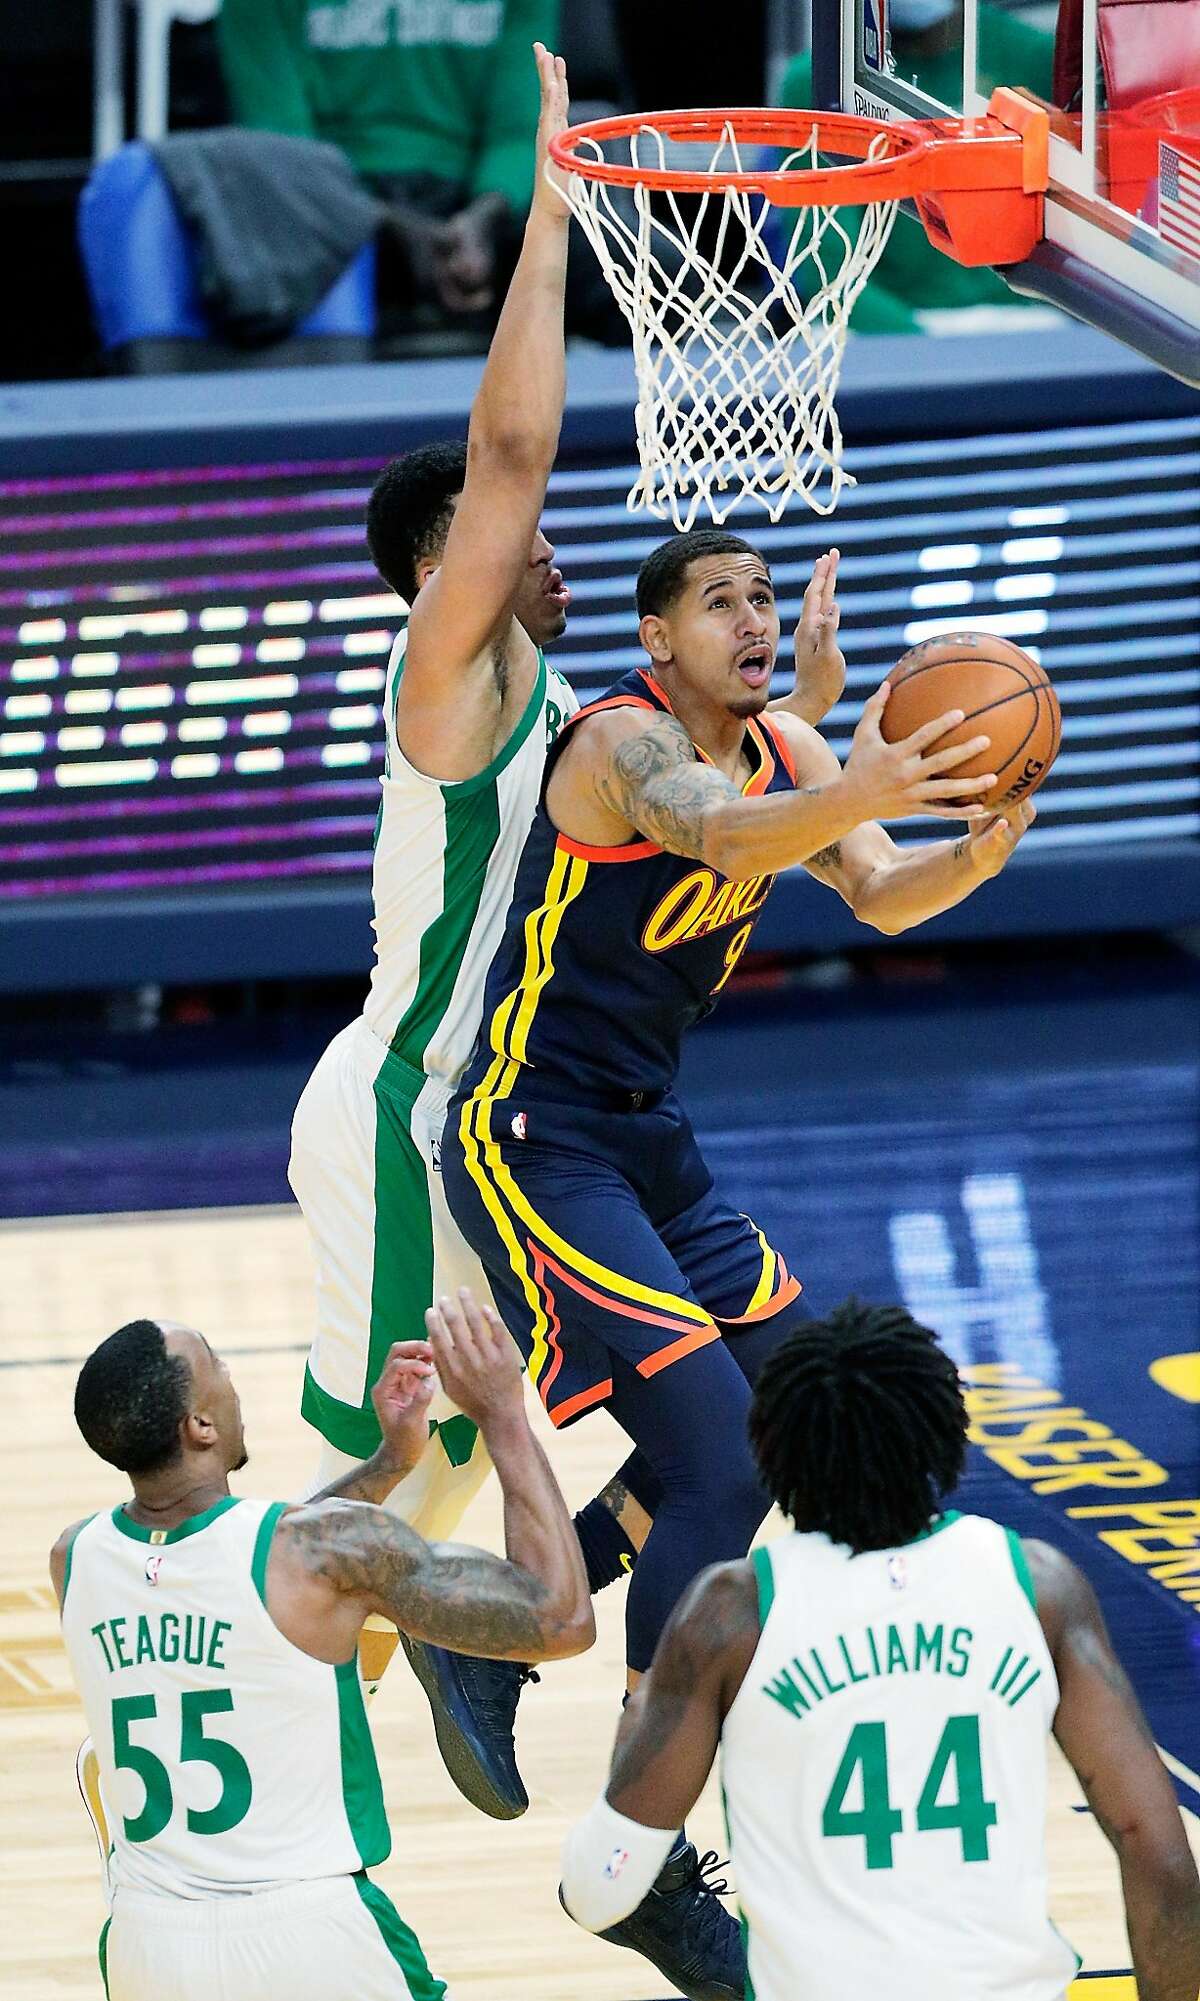 Juan Toscano Anderson (95) shoots in the first half as the Golden State Warriors played the Boston Celtics at Chase Center in San Francisco, Calif., on Tuesday, February 2, 2021.